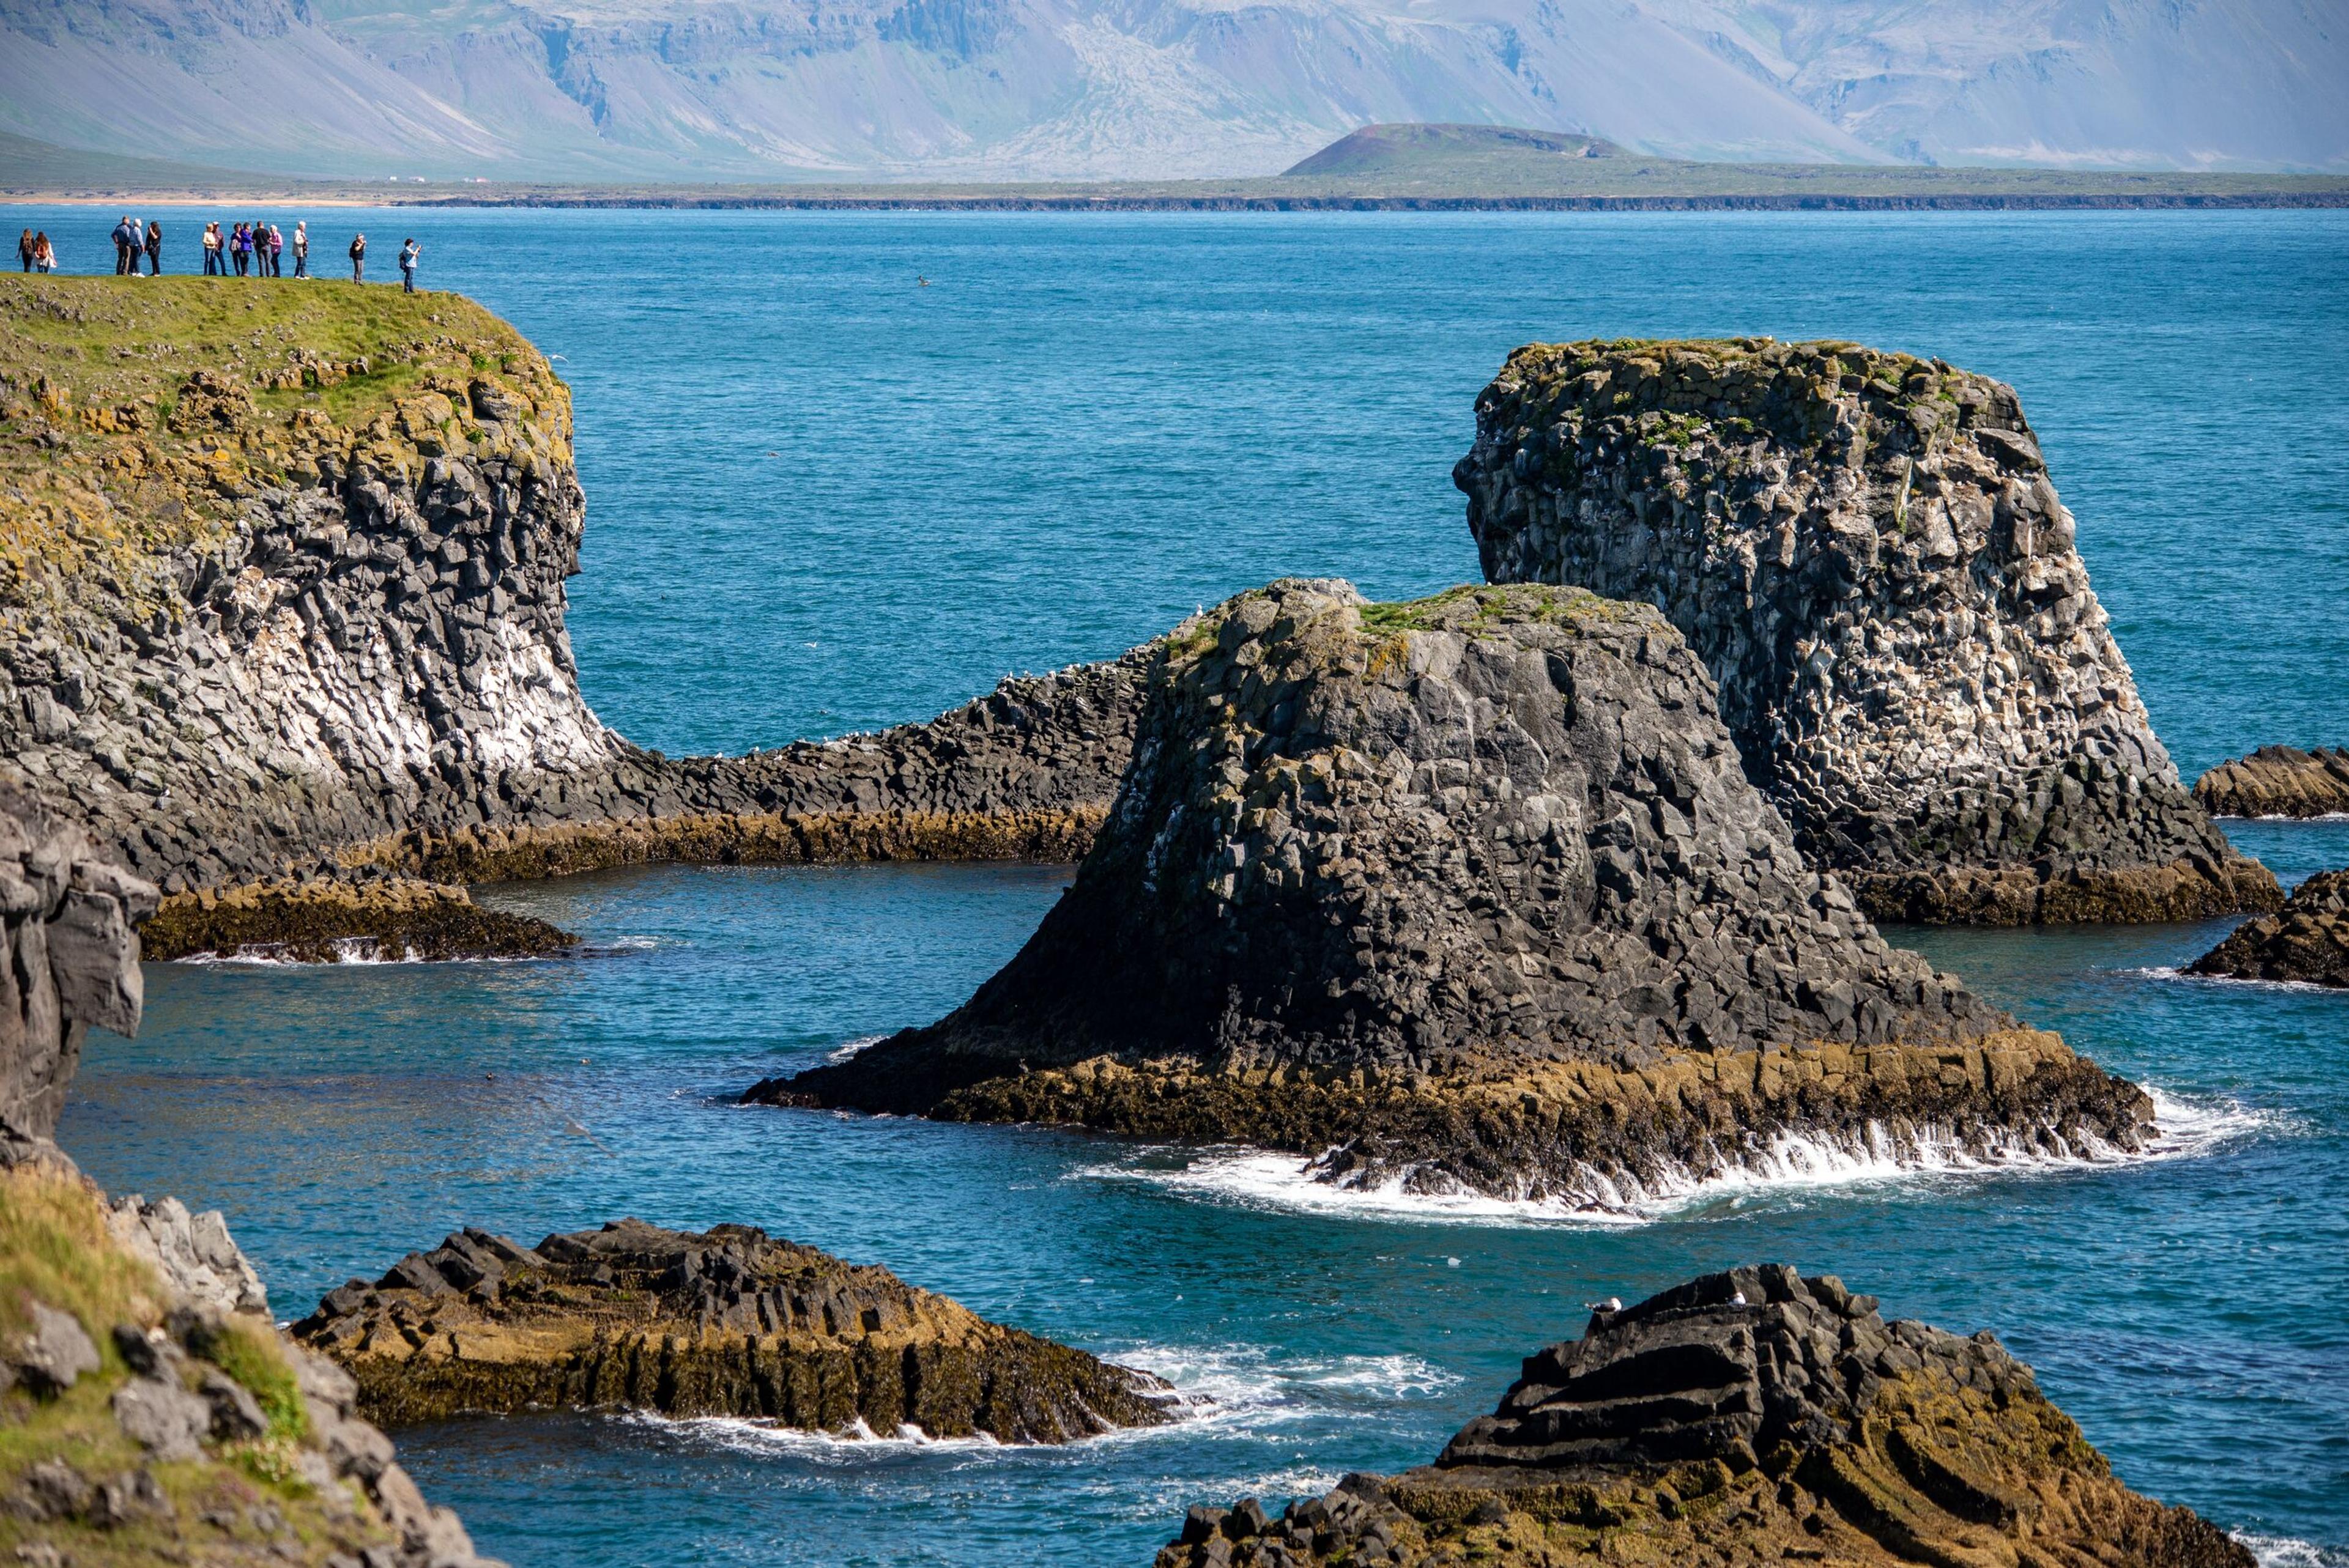 "Stunning coastal rock formations sculpted by nature's forces.